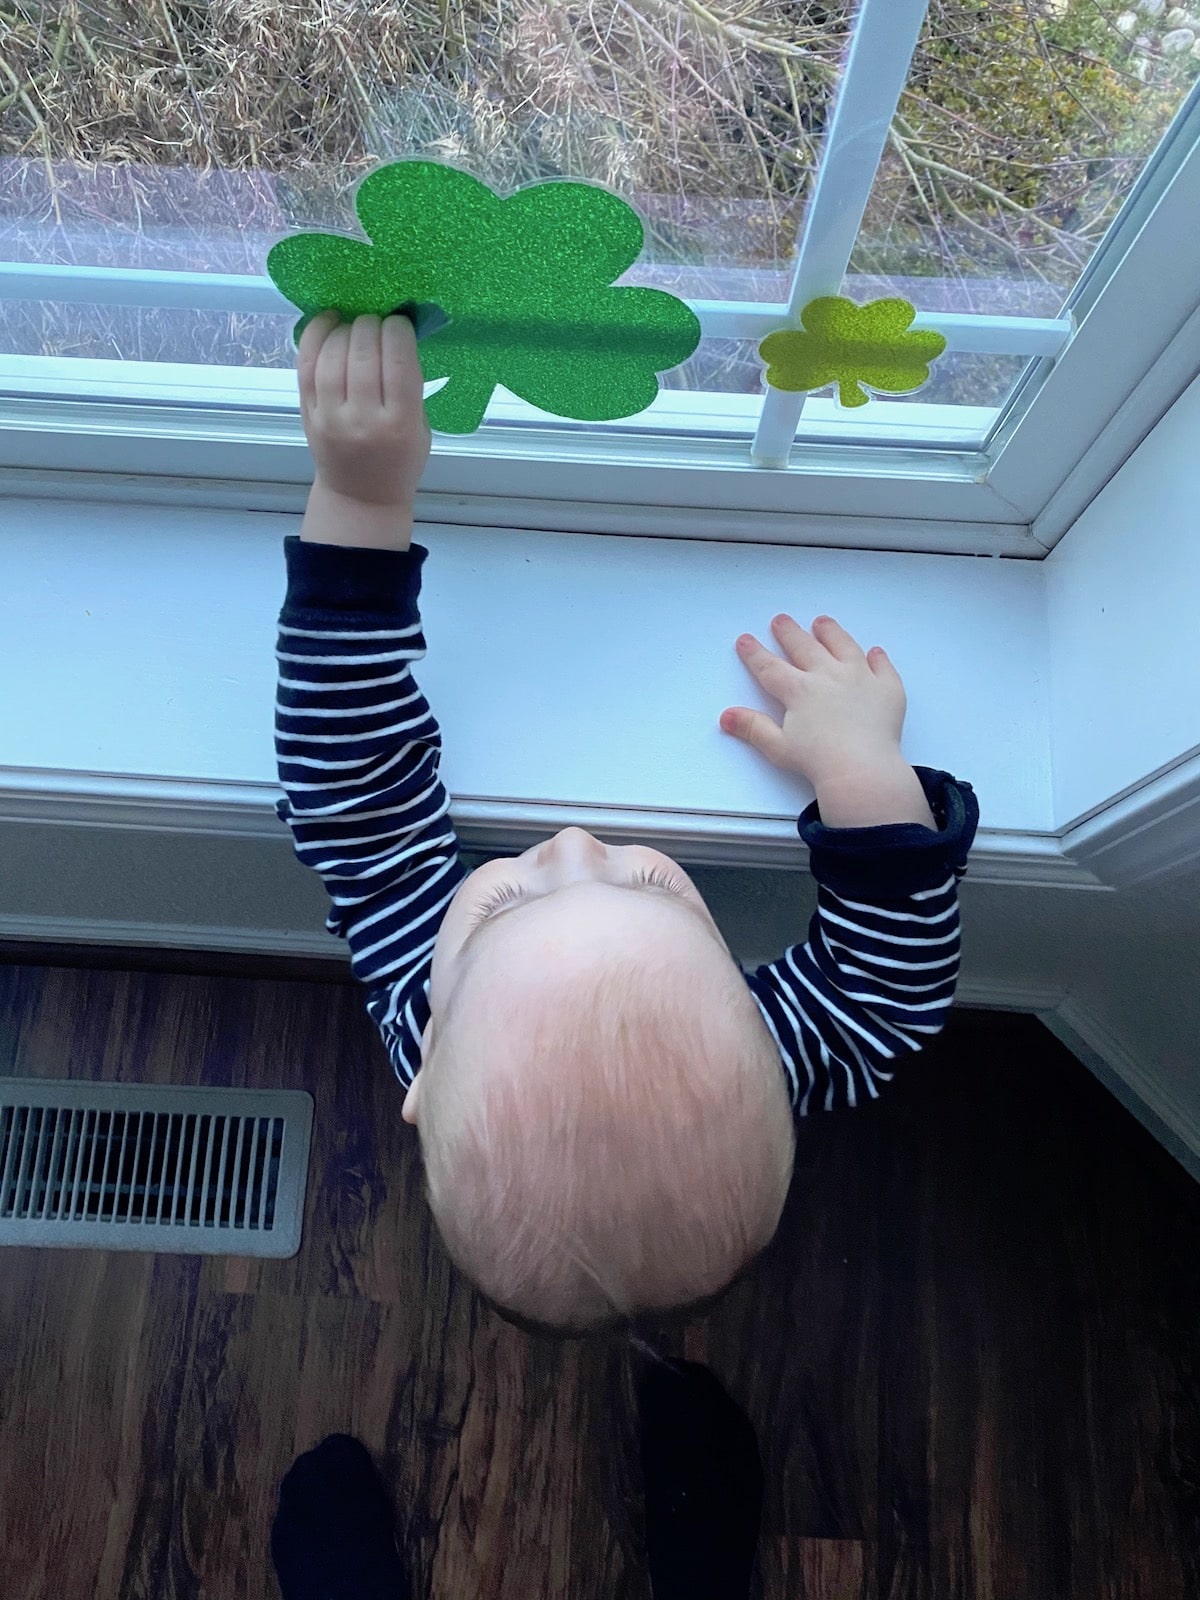 Simple Window Decorations For St Patrick’s Day